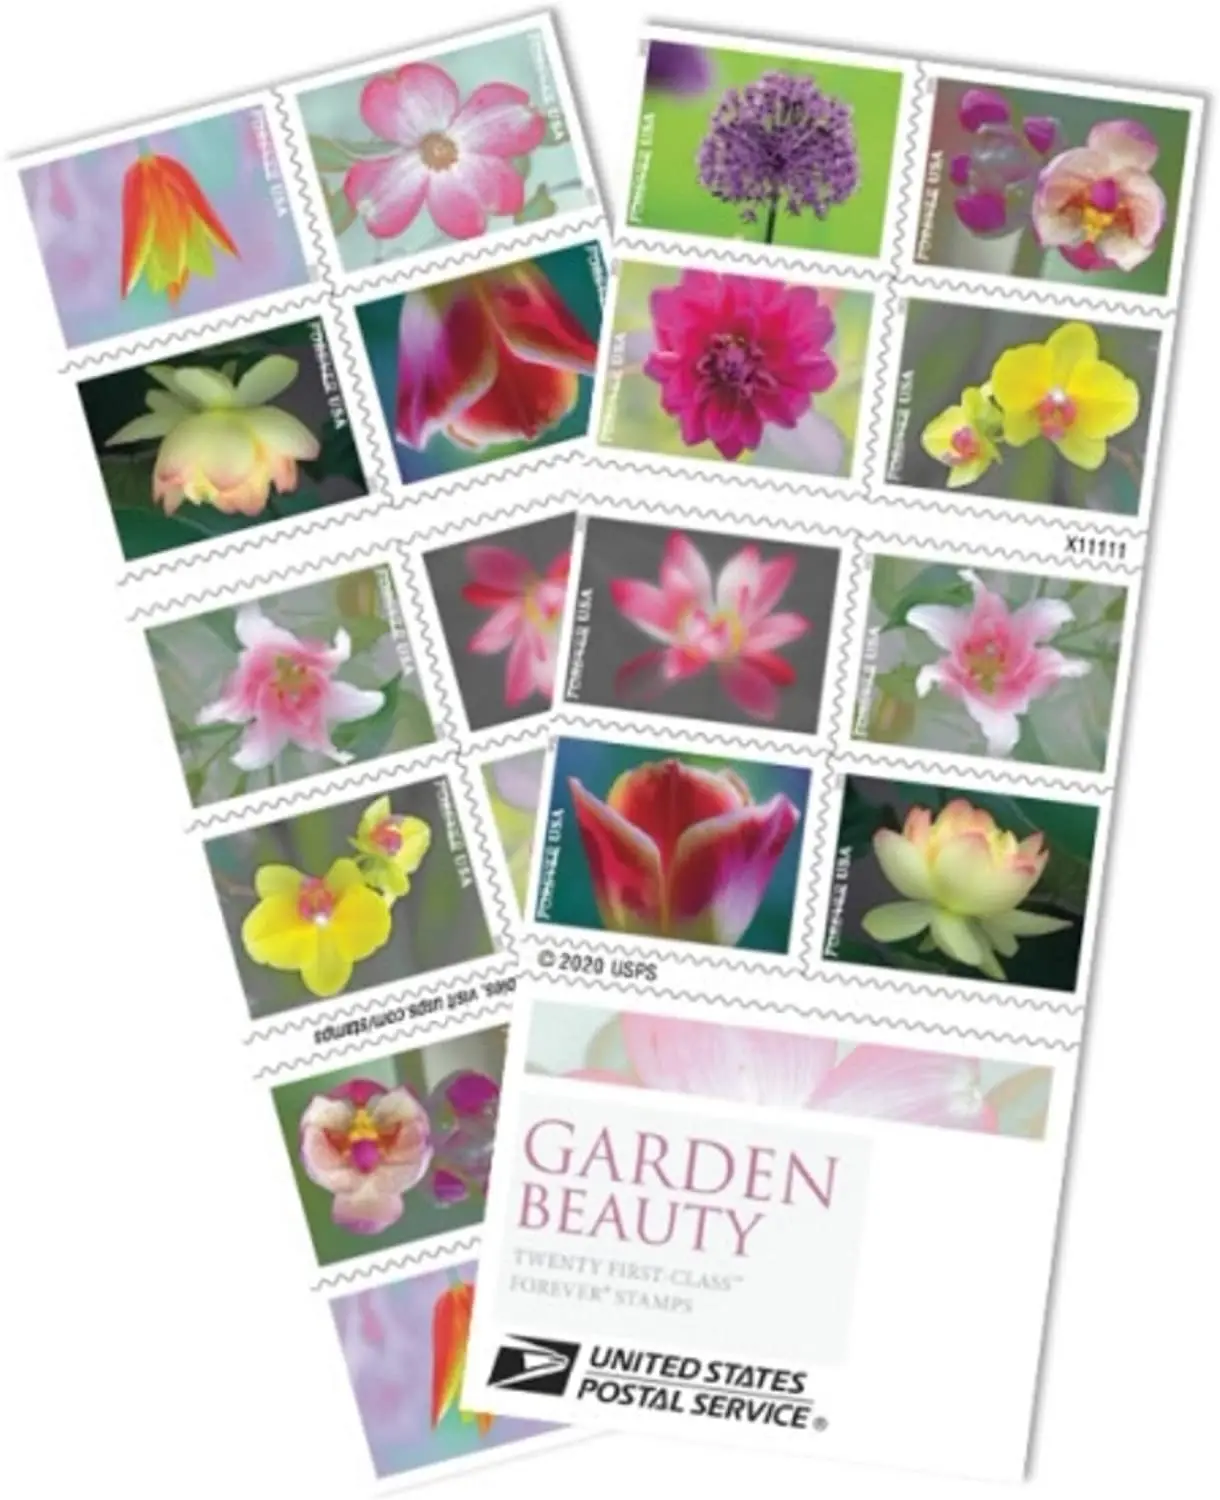 

Garden Beauty Forever Postage Stamps US Postal First Class Wedding Celebration Anniversary Flowers (2 Books of 40 Stamps)